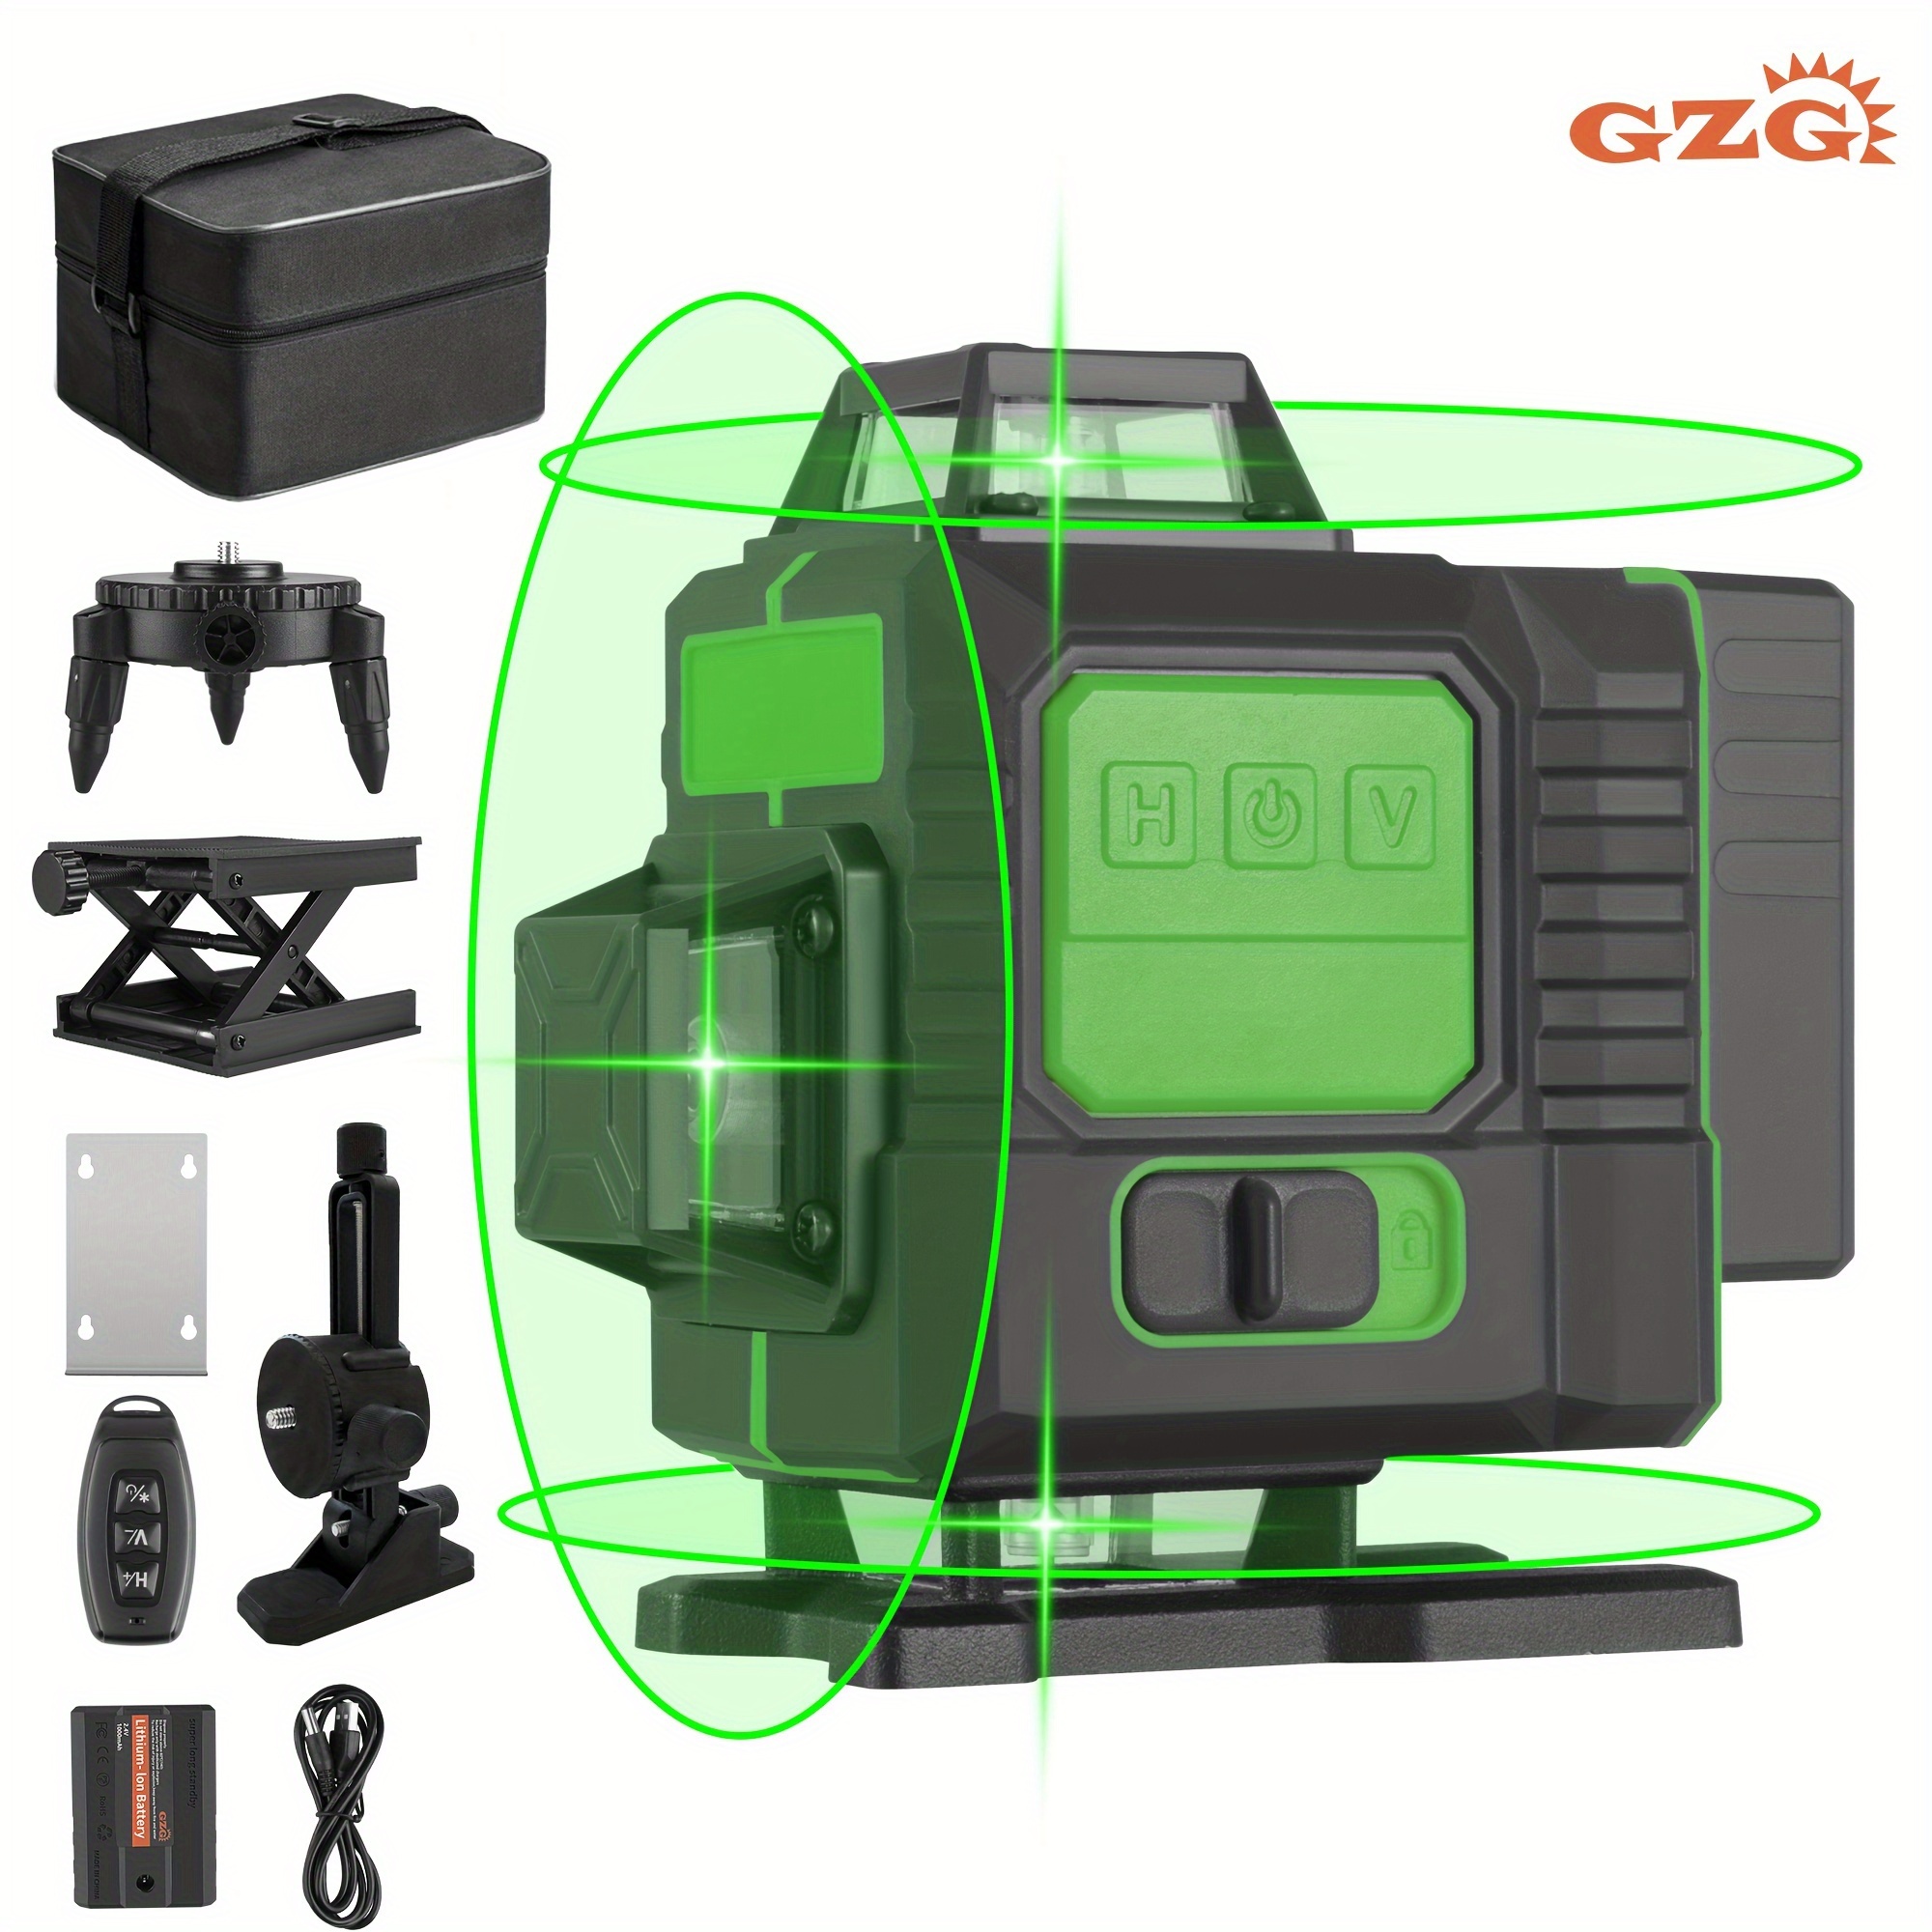 

1 Set Gzg Laser Level 4x360 Self Leveling 16 Lines Green Beam 4d Cross Professional Line Laser Tool Pulse Mode For Construction Tiling Picture Hanging With1 Battery, Remote Controller, Lifting Base